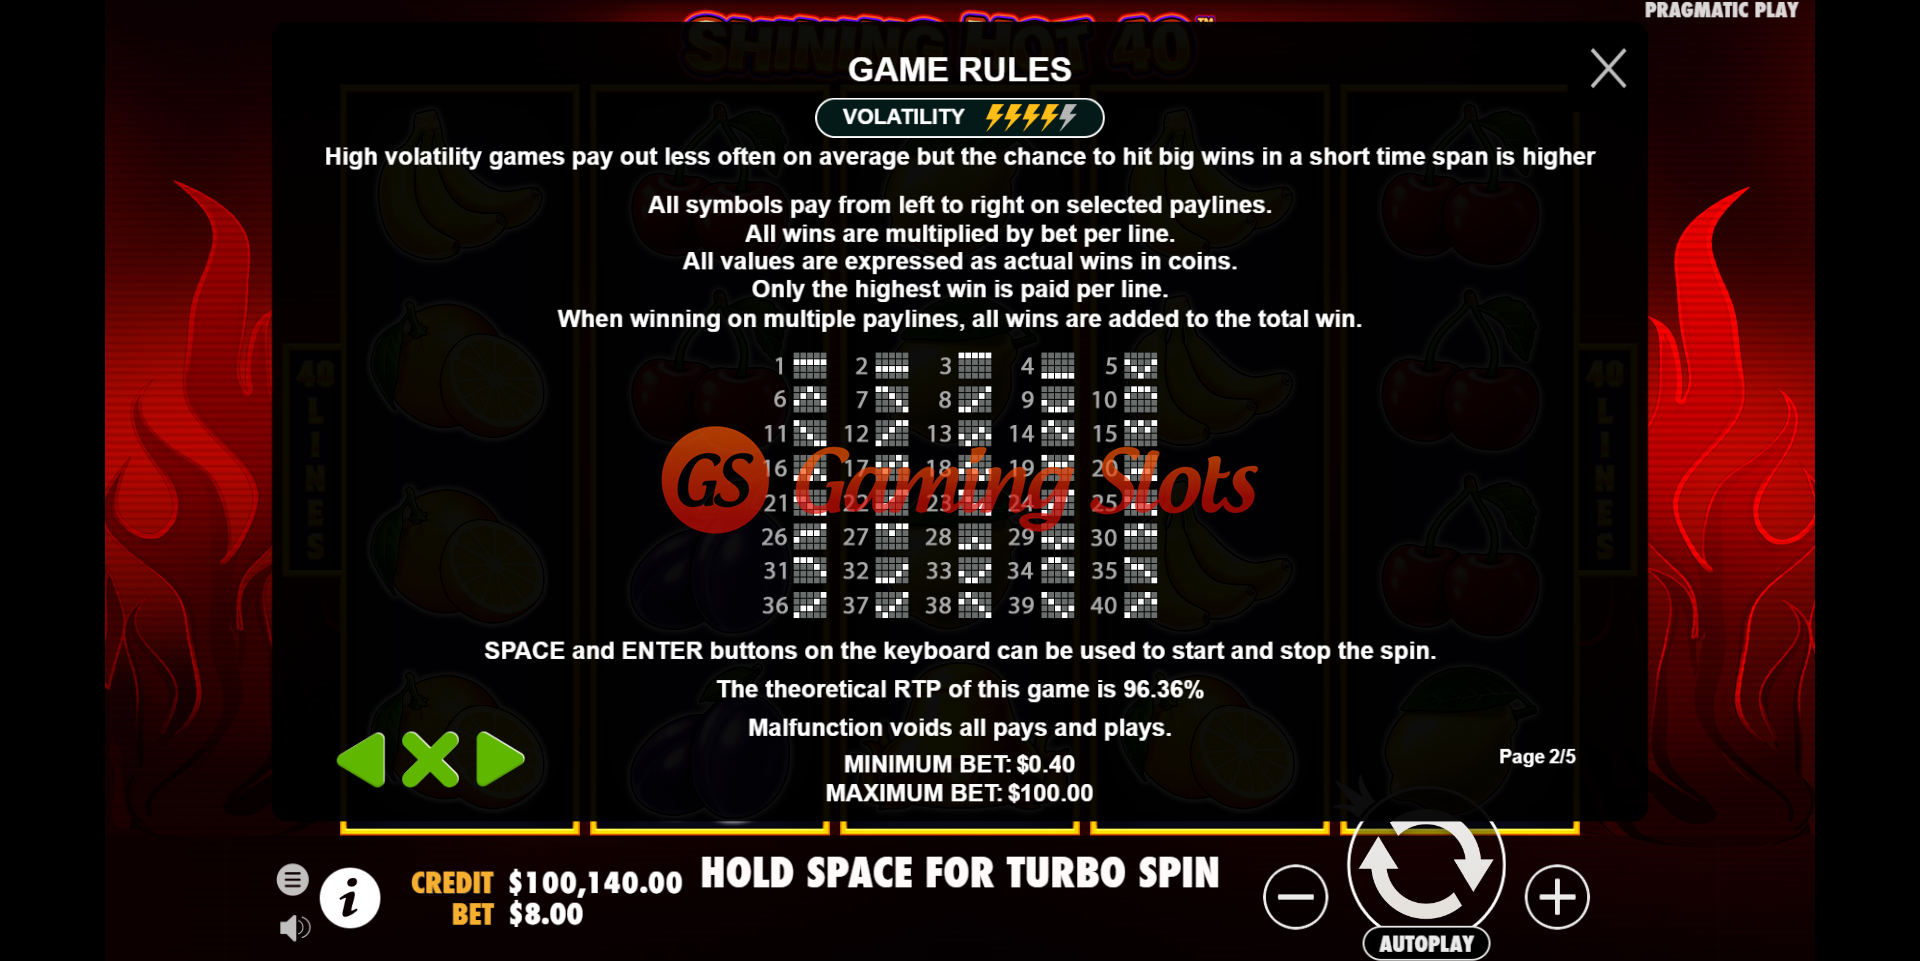 Game Rules for Shining Hot 40 slot from Pragmatic Play